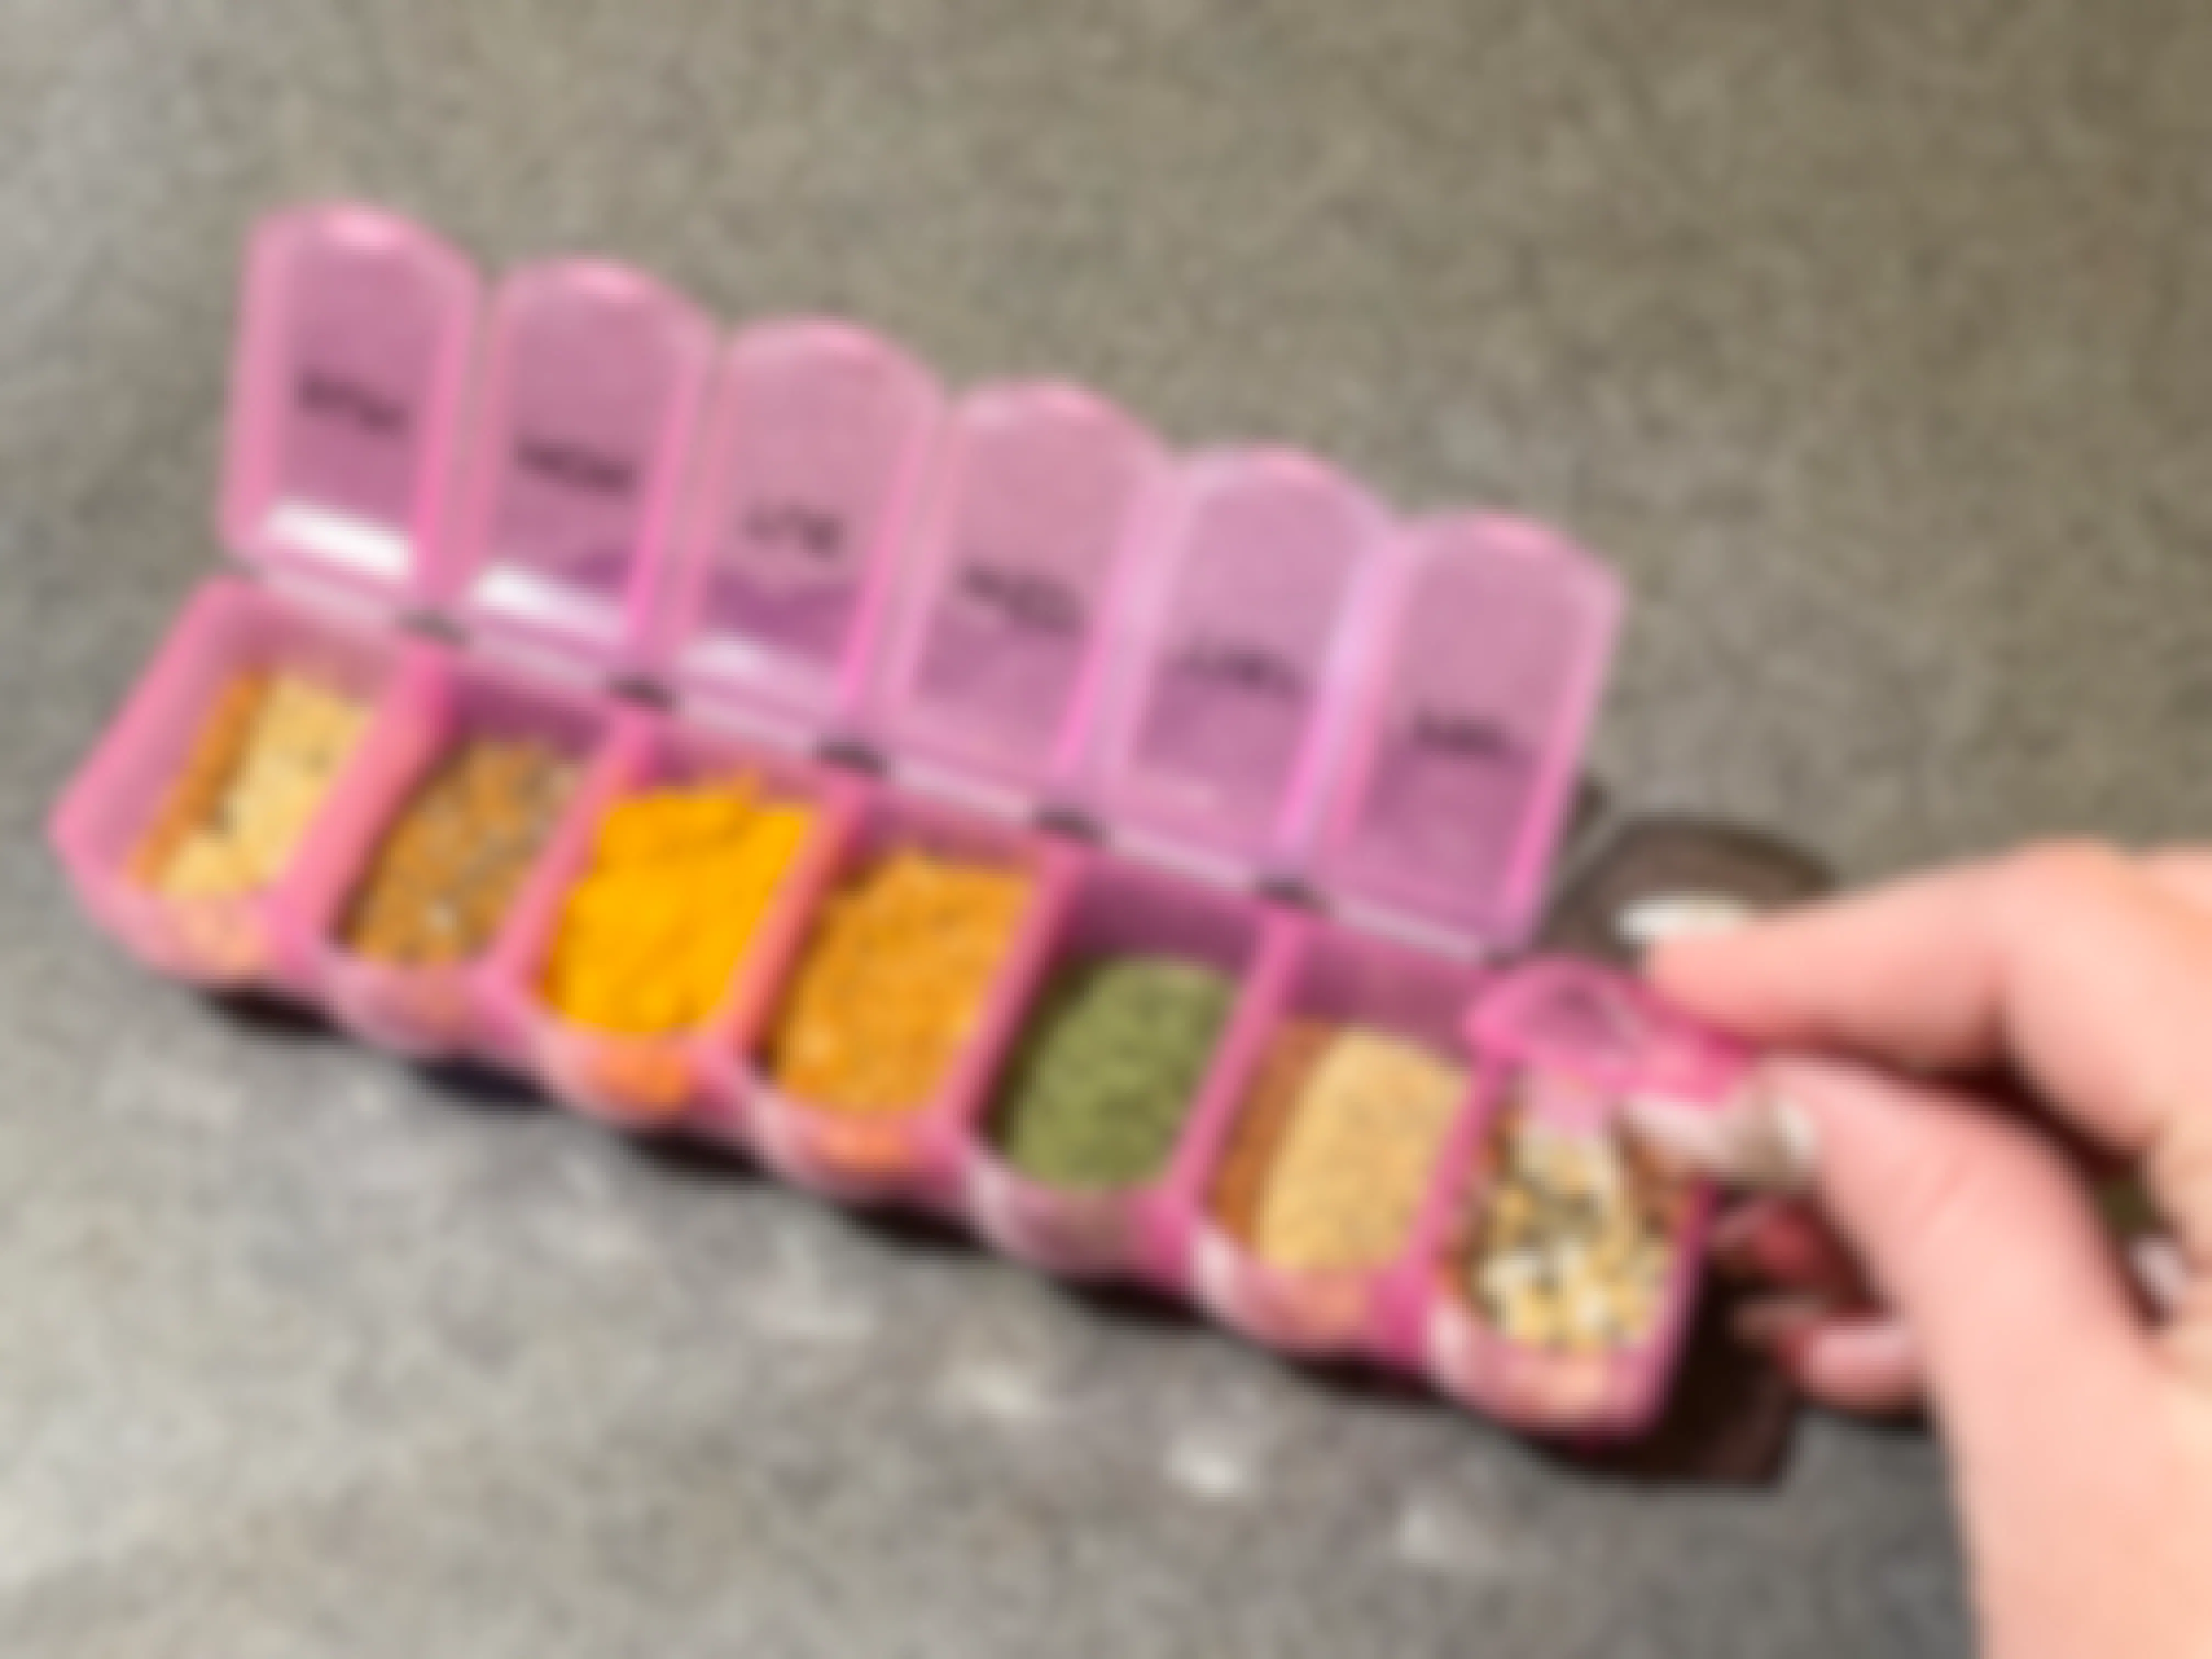 spices put into pill holder 